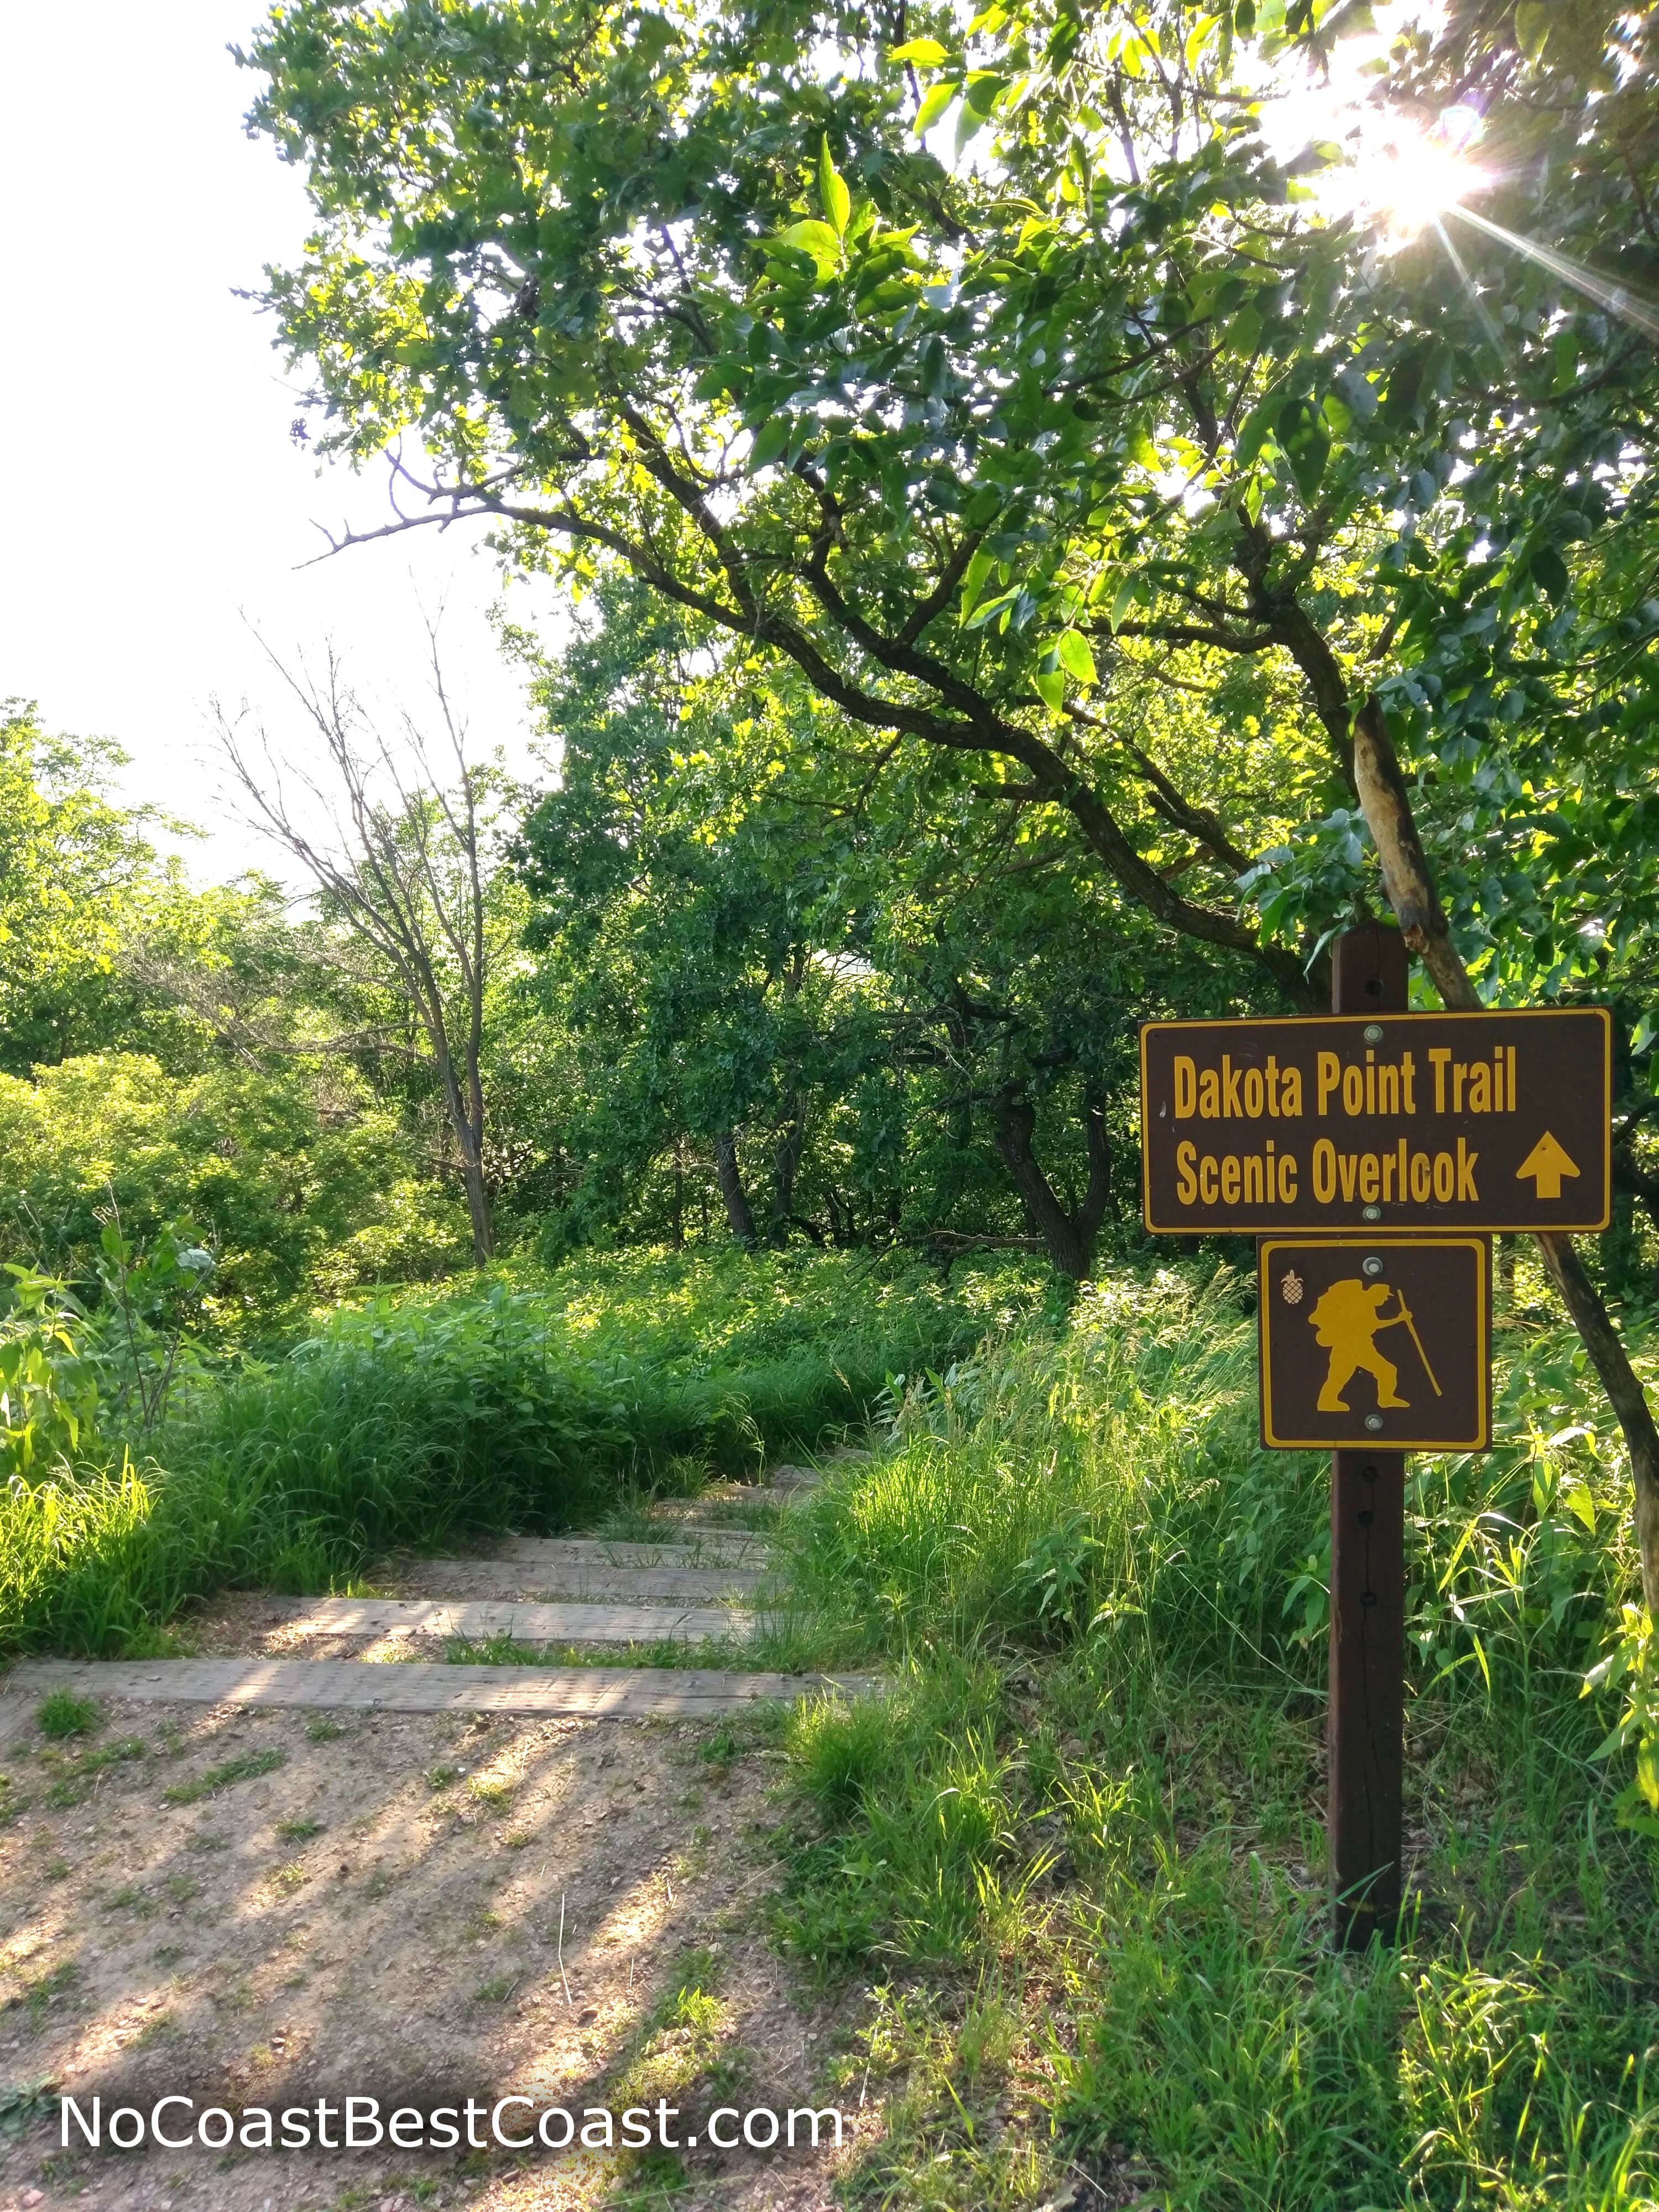 This sign marks the trailhead to the scenic overlook